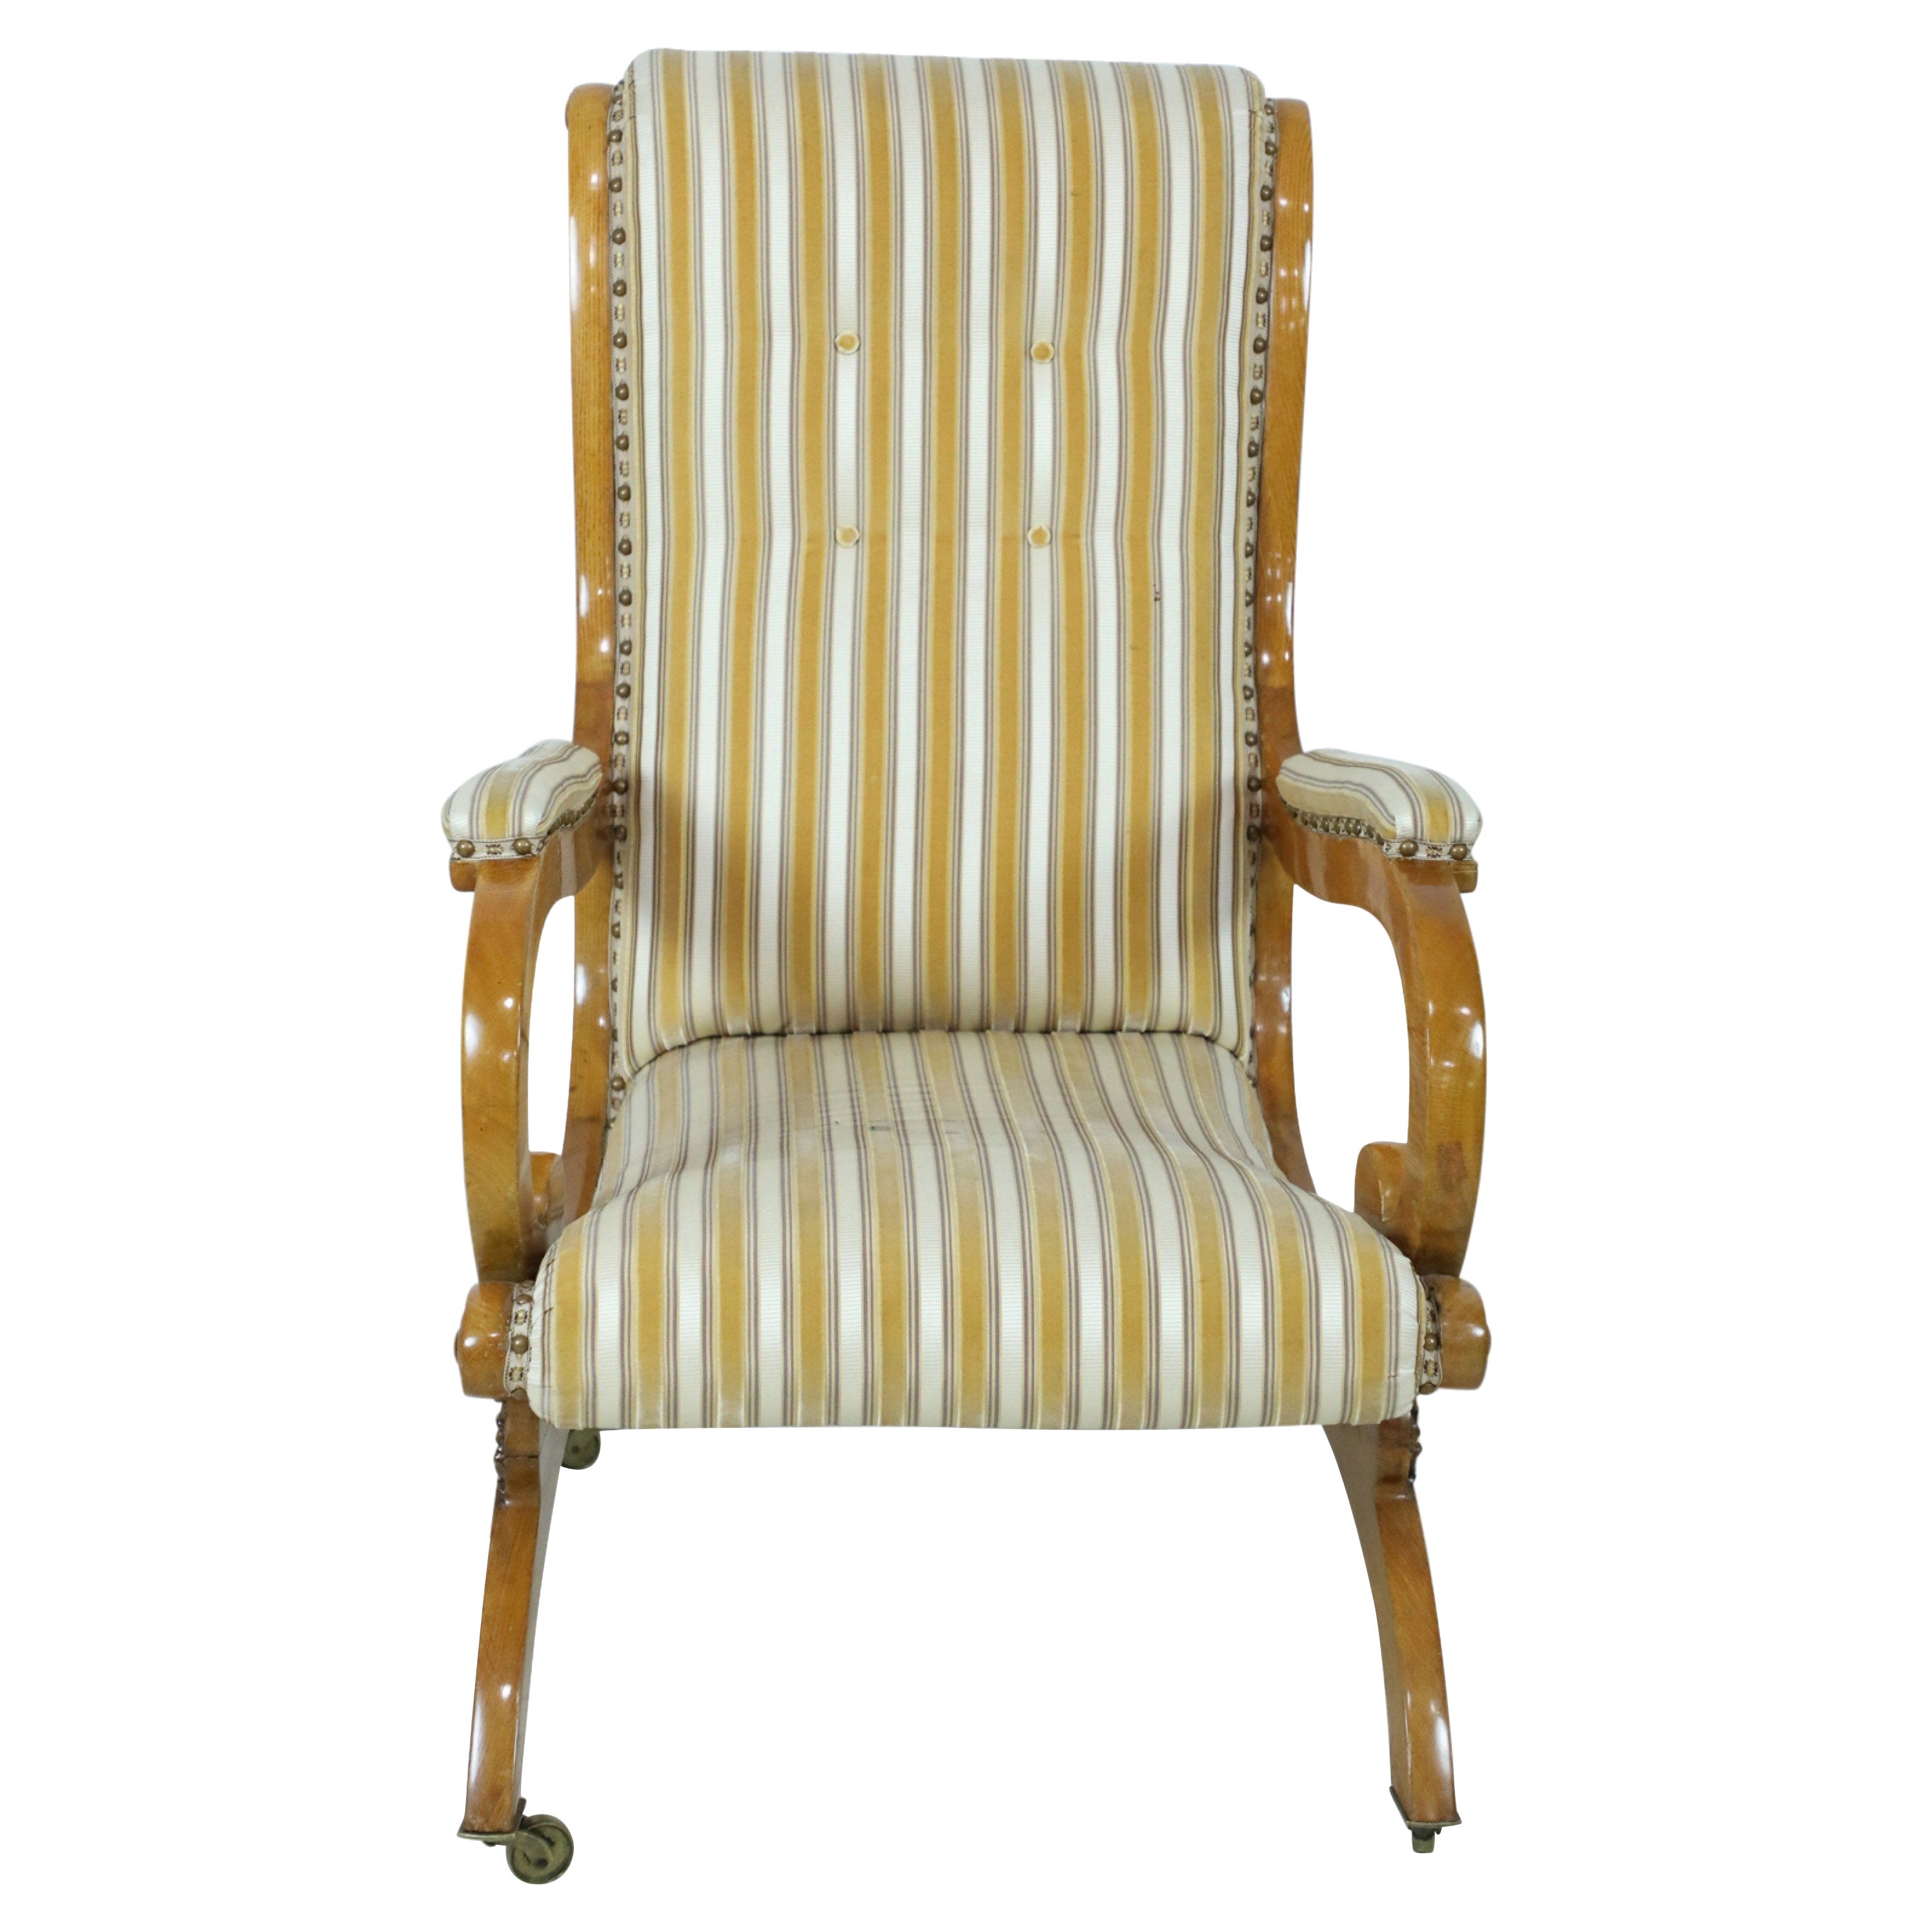 English Victorian Blond Wood Scroll Armchair with Striped Upholstery